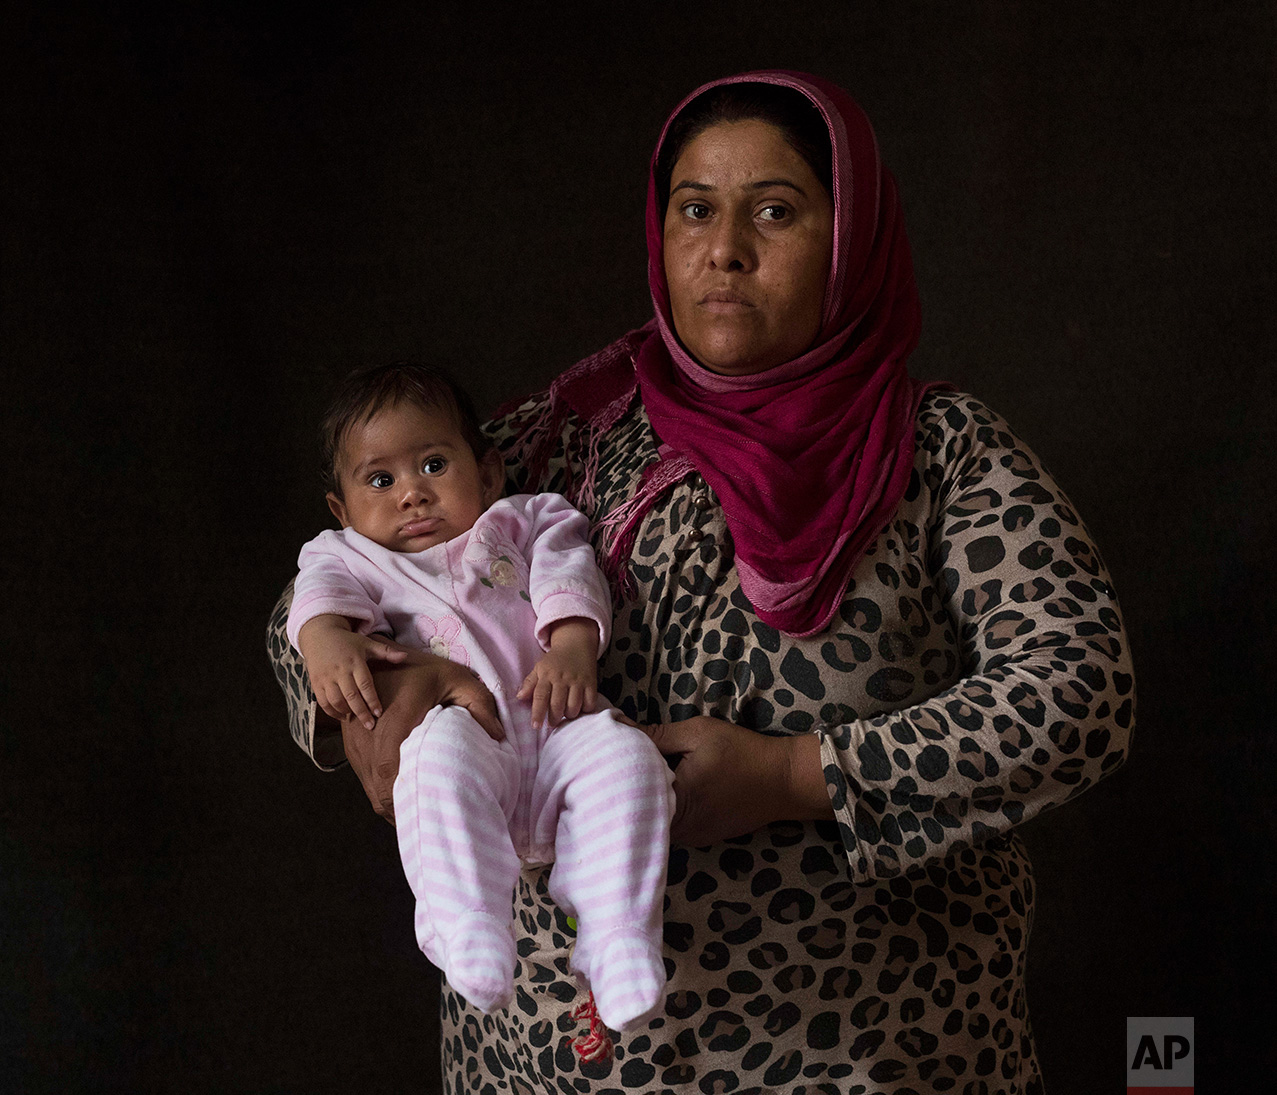  In this Thursday Sept. 22, 2016 photo 35-year-old Najlaa Khalil Tamo, a Syrian mother from Al Hasakah, poses with her baby girl Ritsona Khalil Isa, in a tent made of blankets given by UNCHR at the Ritsona refugee camp in Greece. Najlaa is one of the